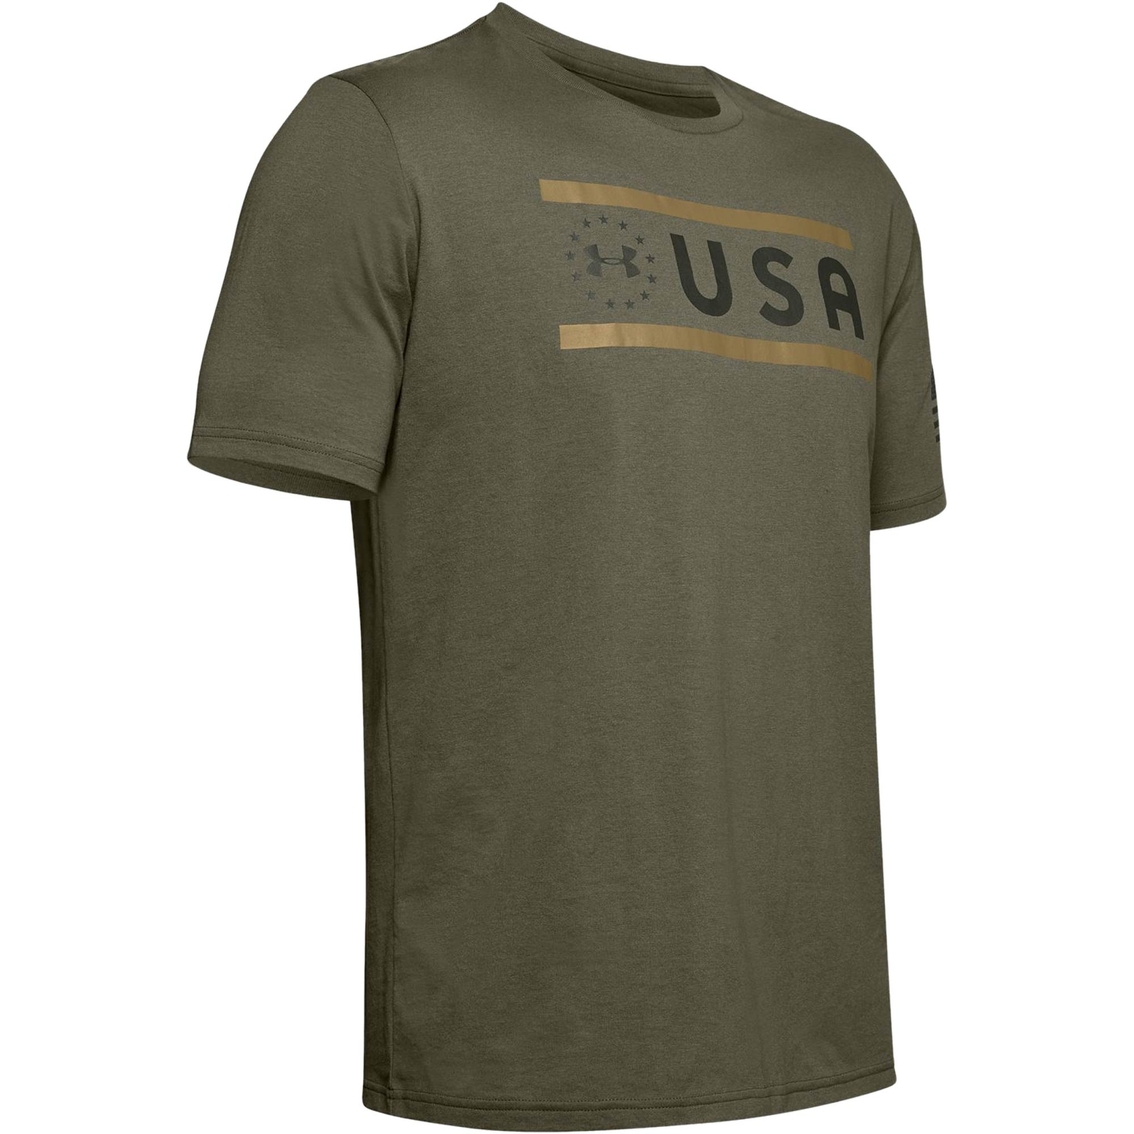 Under Armour Freedom USA Tee - Image 5 of 6